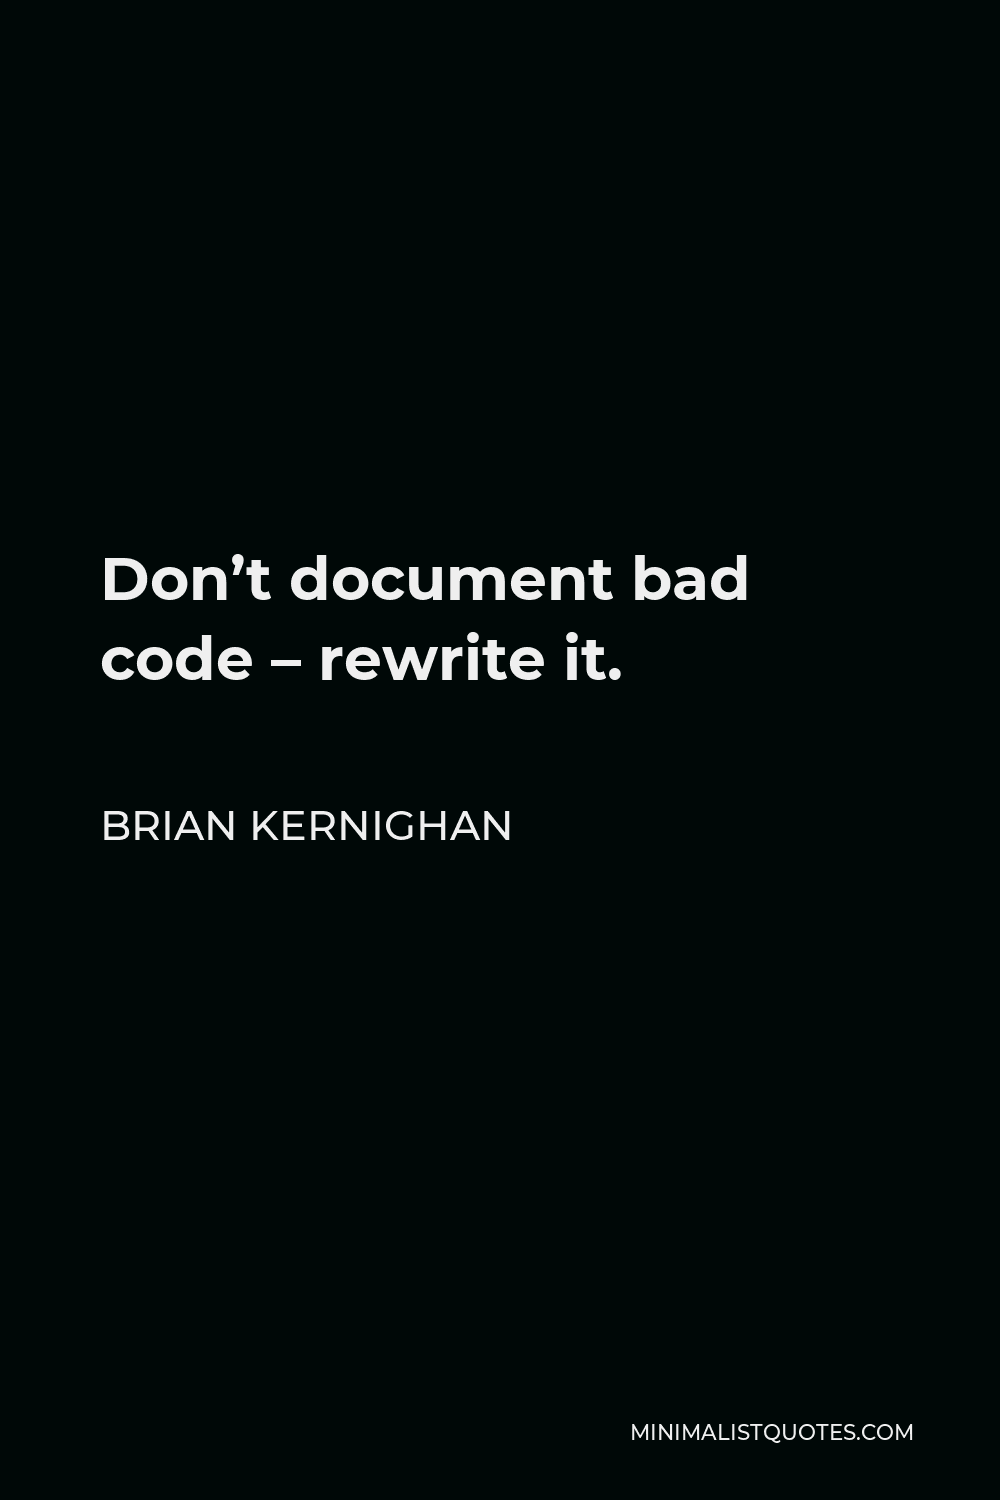 Brian Kernighan Quote - Don’t document bad code – rewrite it.